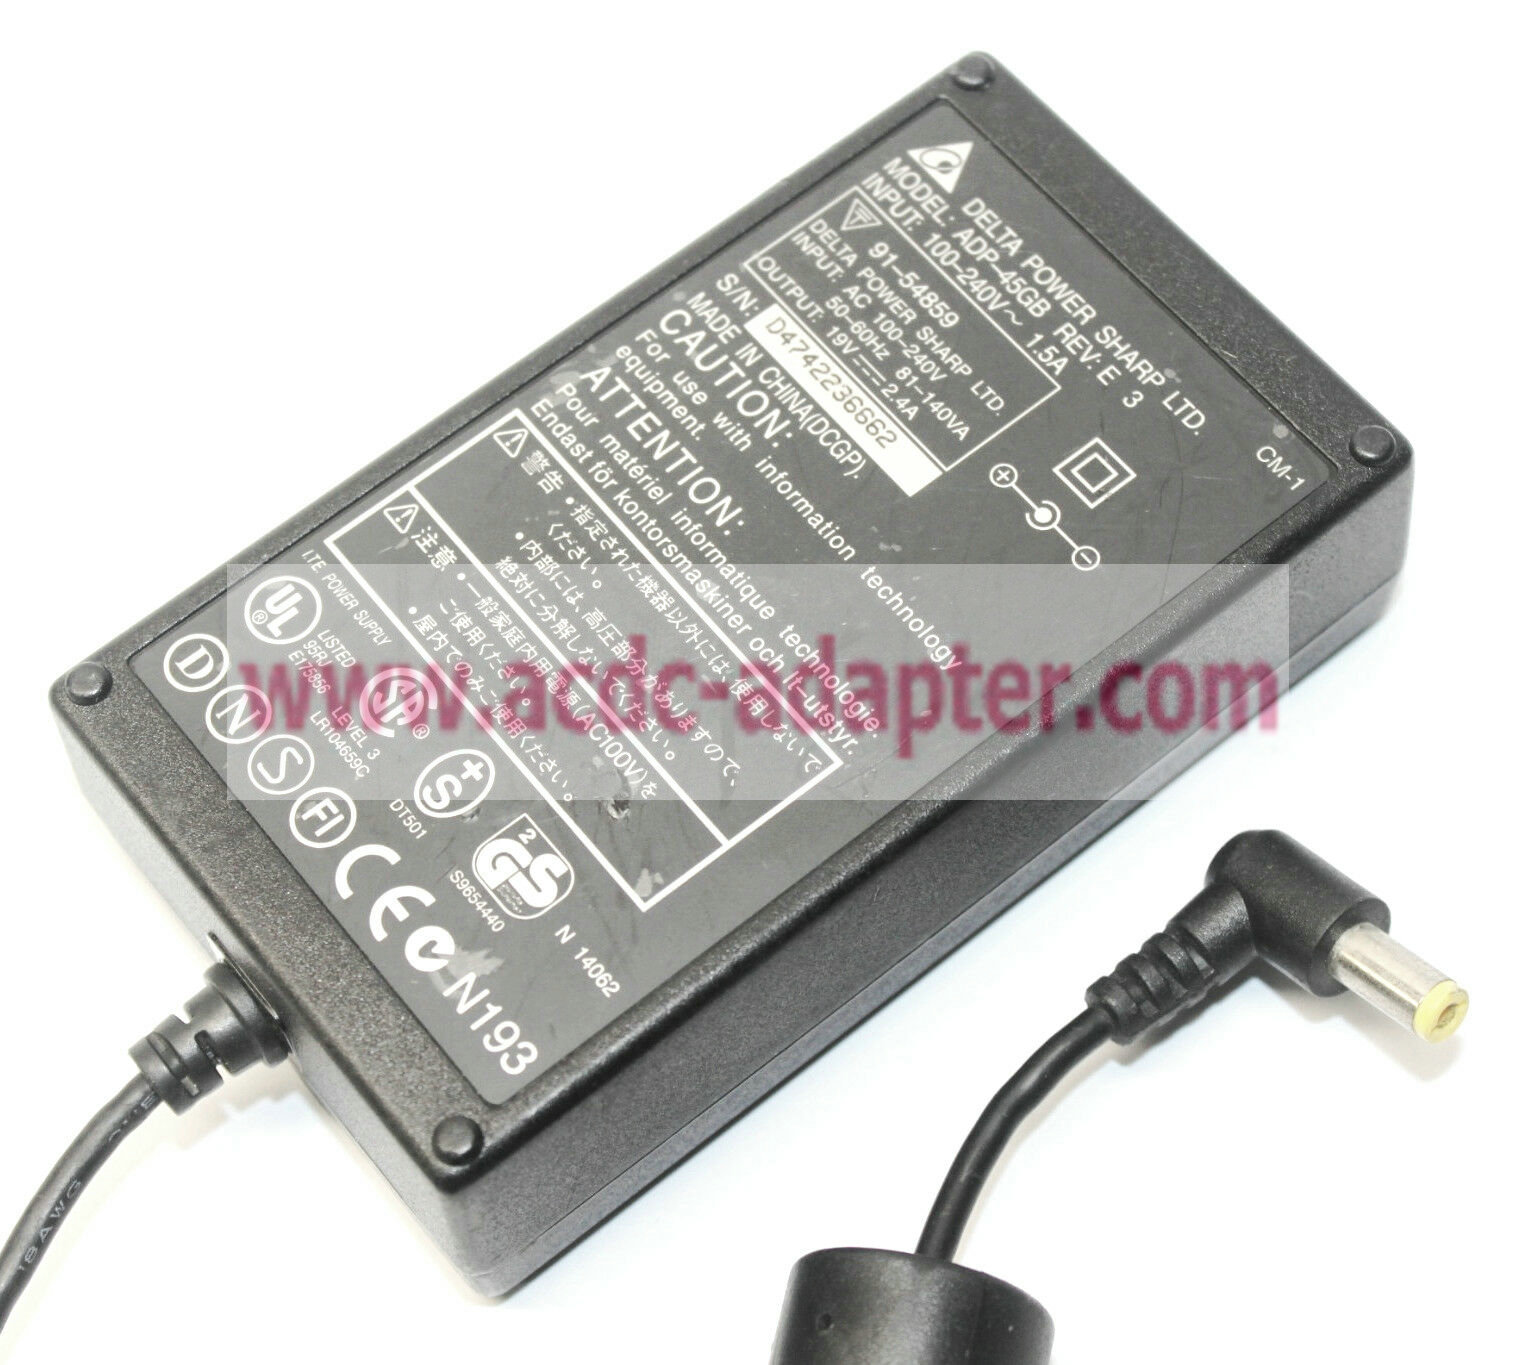 NEW Delta Power Sharp ADP-45GB ITE Power Supply DC 19V 2.4A AC Adapter - Click Image to Close